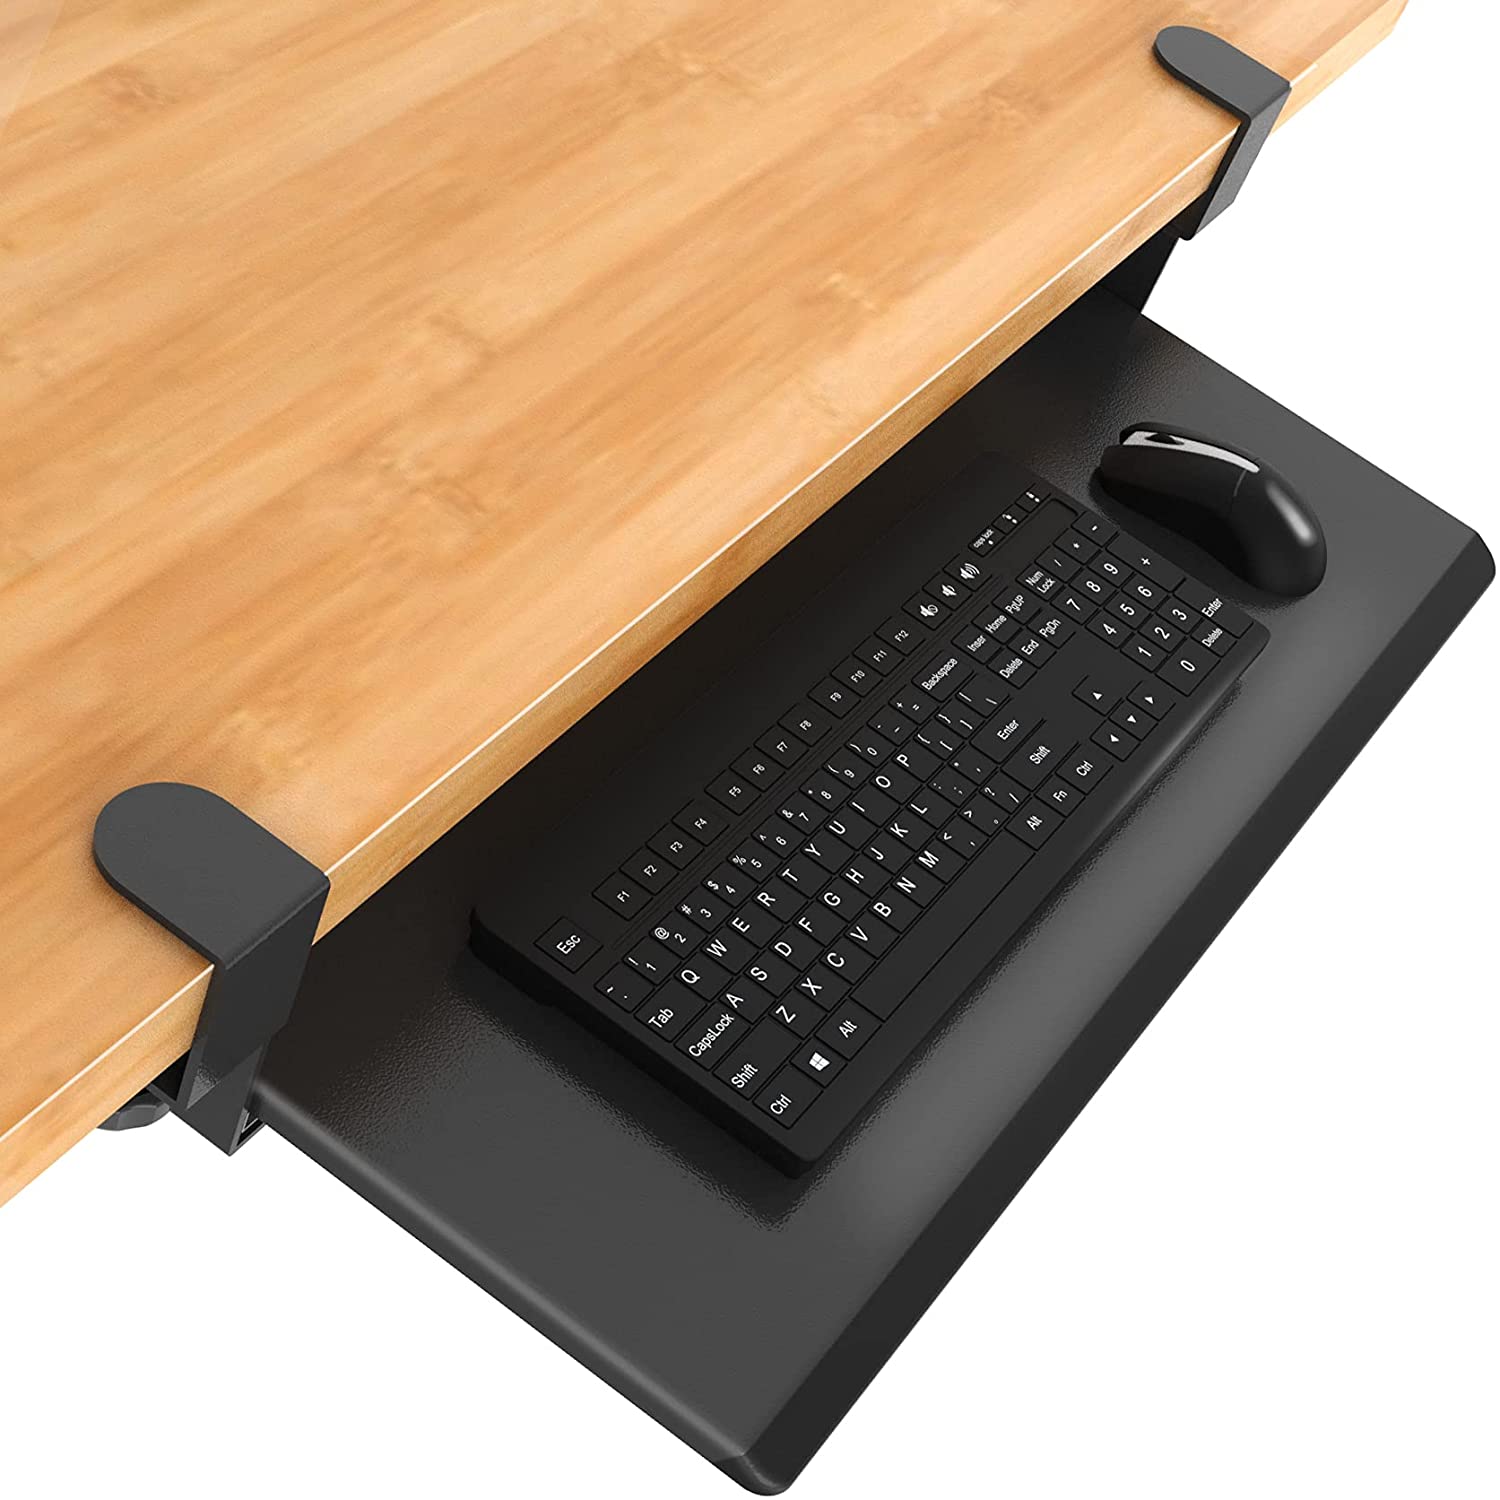 Photo 1 of SUDKBTREYS   Large Keyboard Tray Under Desk with Sturdy C Clamp Mount System SlideOut Keyboard Stand No Screw into Desk Great for Home or Office Black